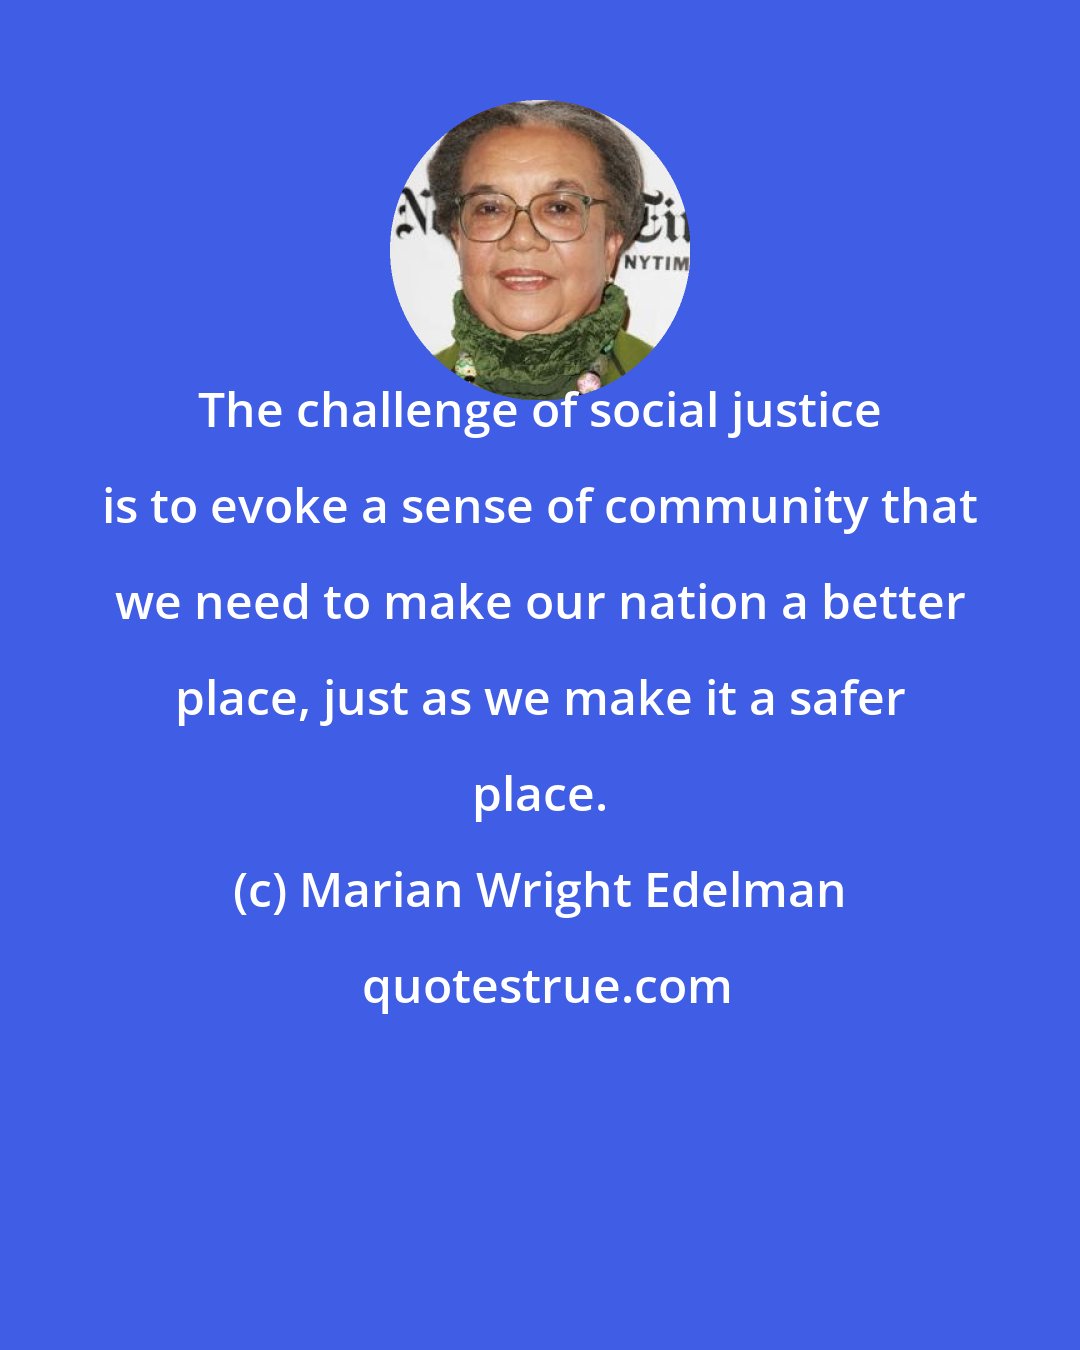 Marian Wright Edelman: The challenge of social justice is to evoke a sense of community that we need to make our nation a better place, just as we make it a safer place.